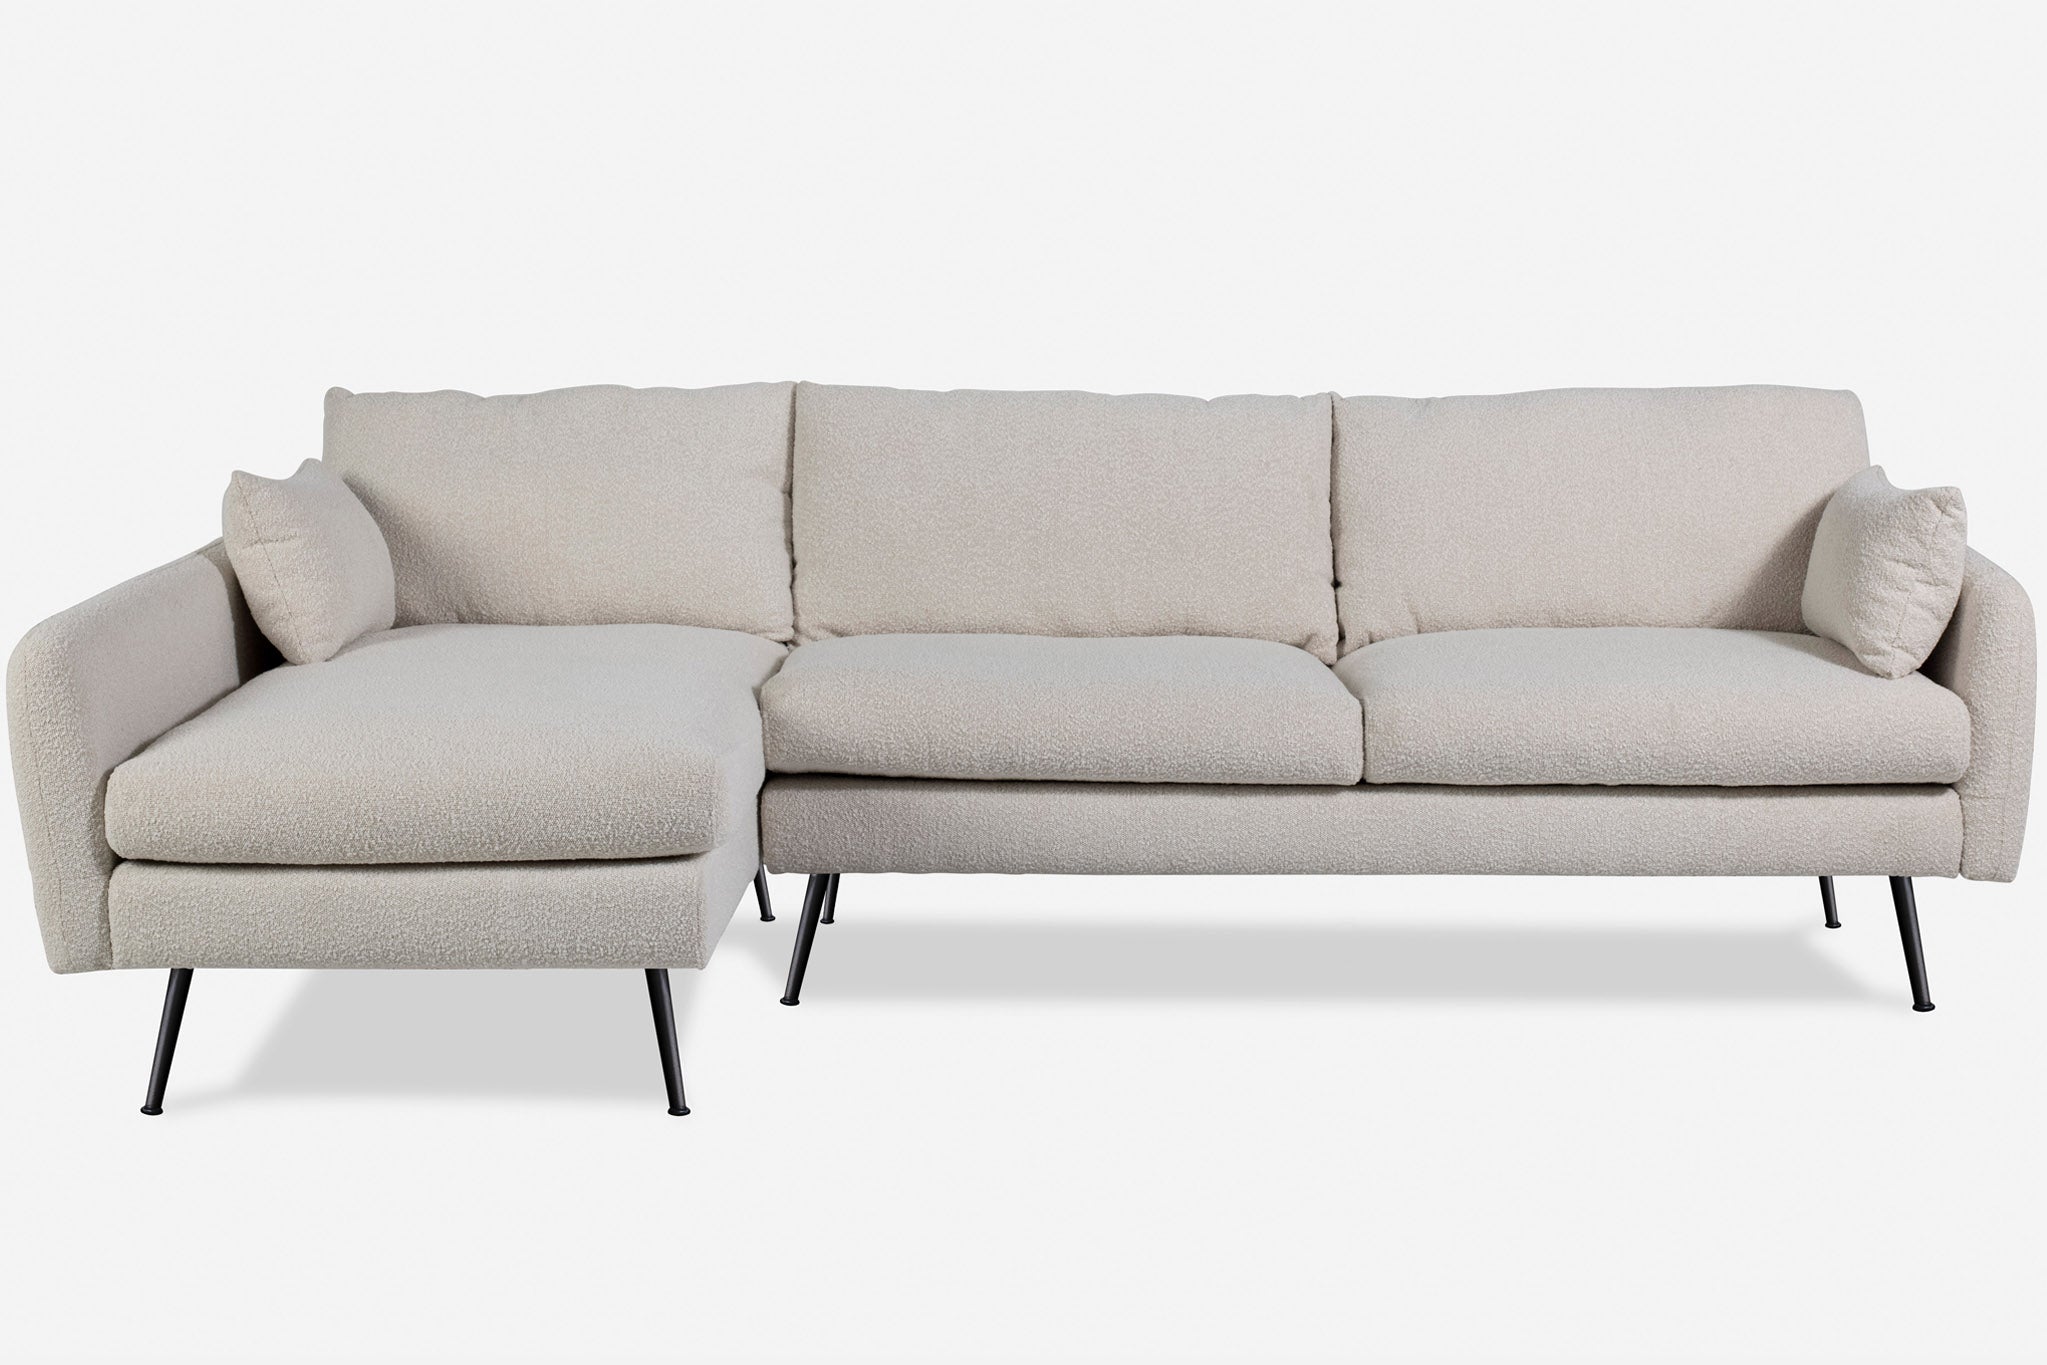 park sectional sofa shown in bouclé with black legs left facing